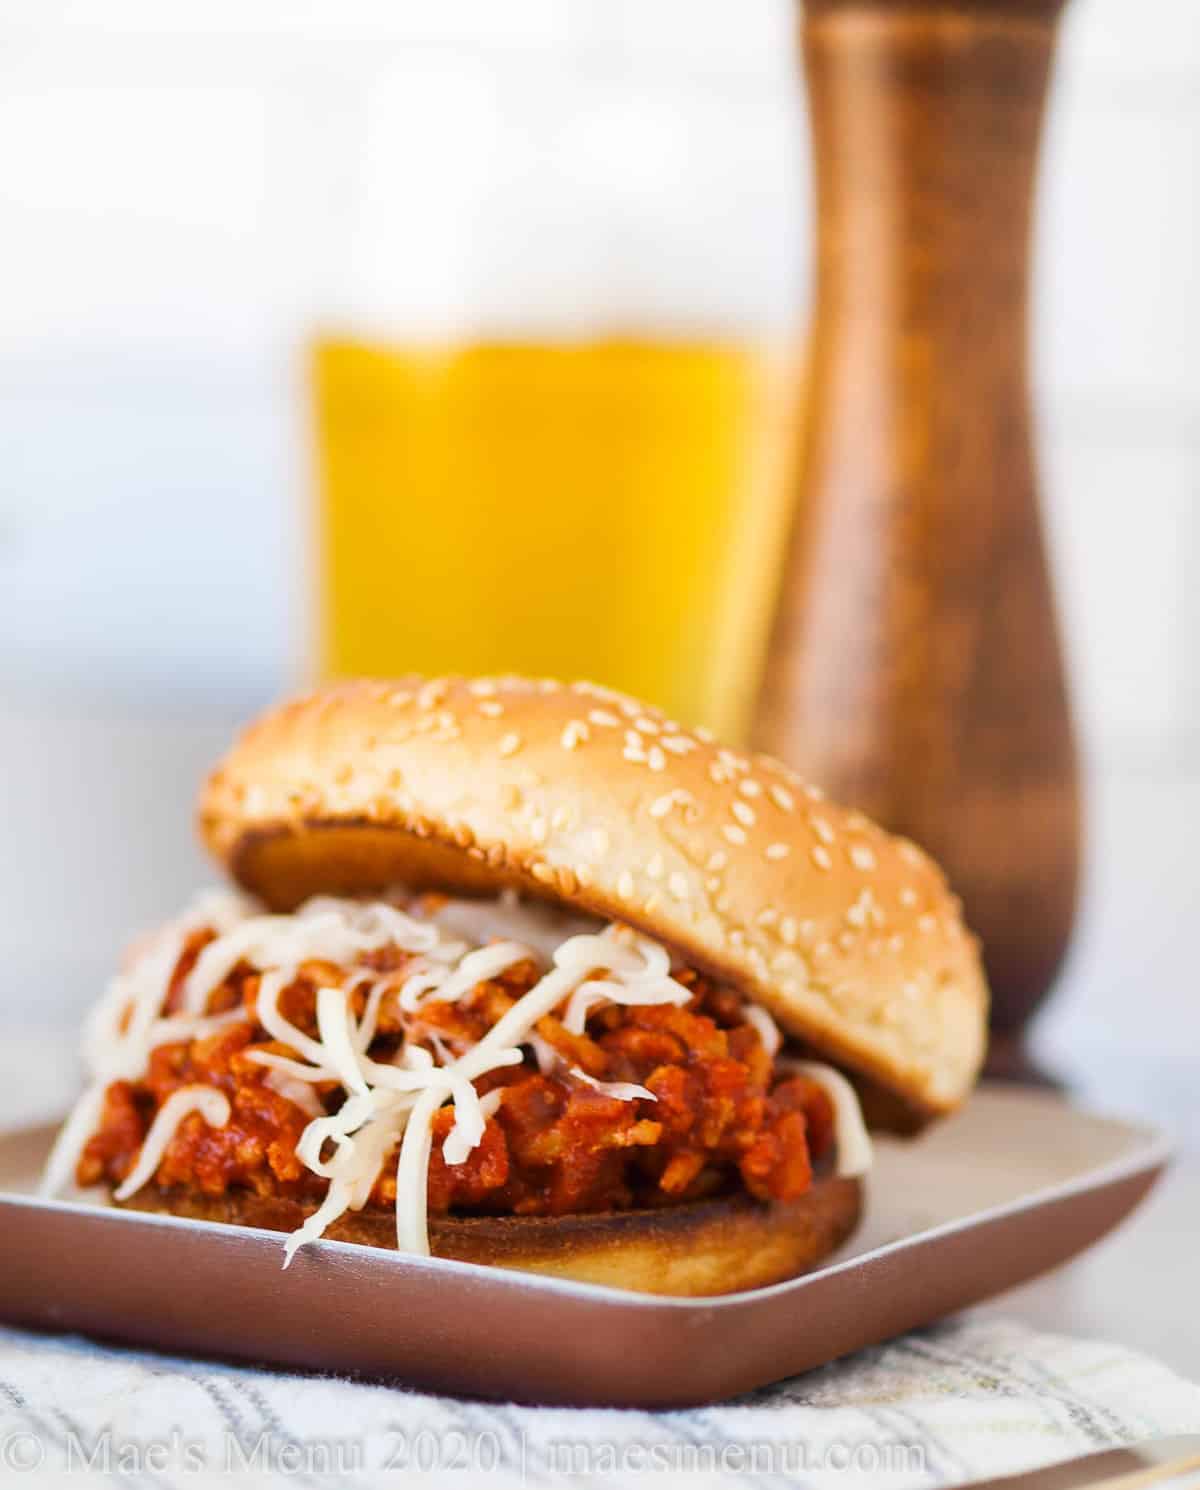 A small dish with a sloppy joe in front of a wooden pepper grinder and a glass of beer